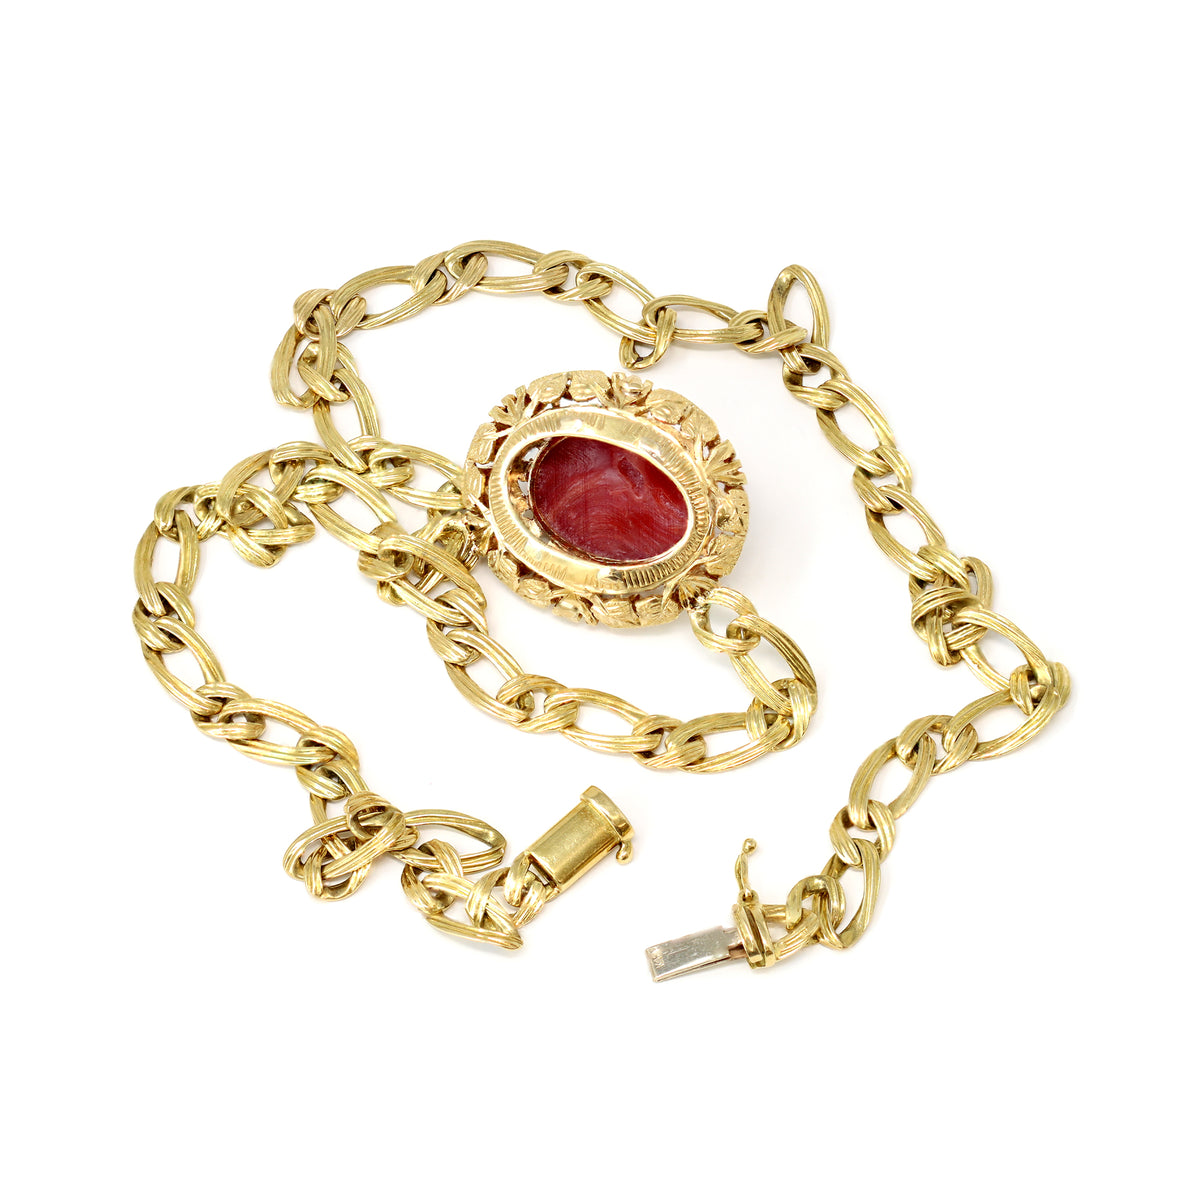 1960s-italian-oxblood-cabochon-coral-and-18-karat-yellow-gold-necklace-coral-back-view-2000x2000